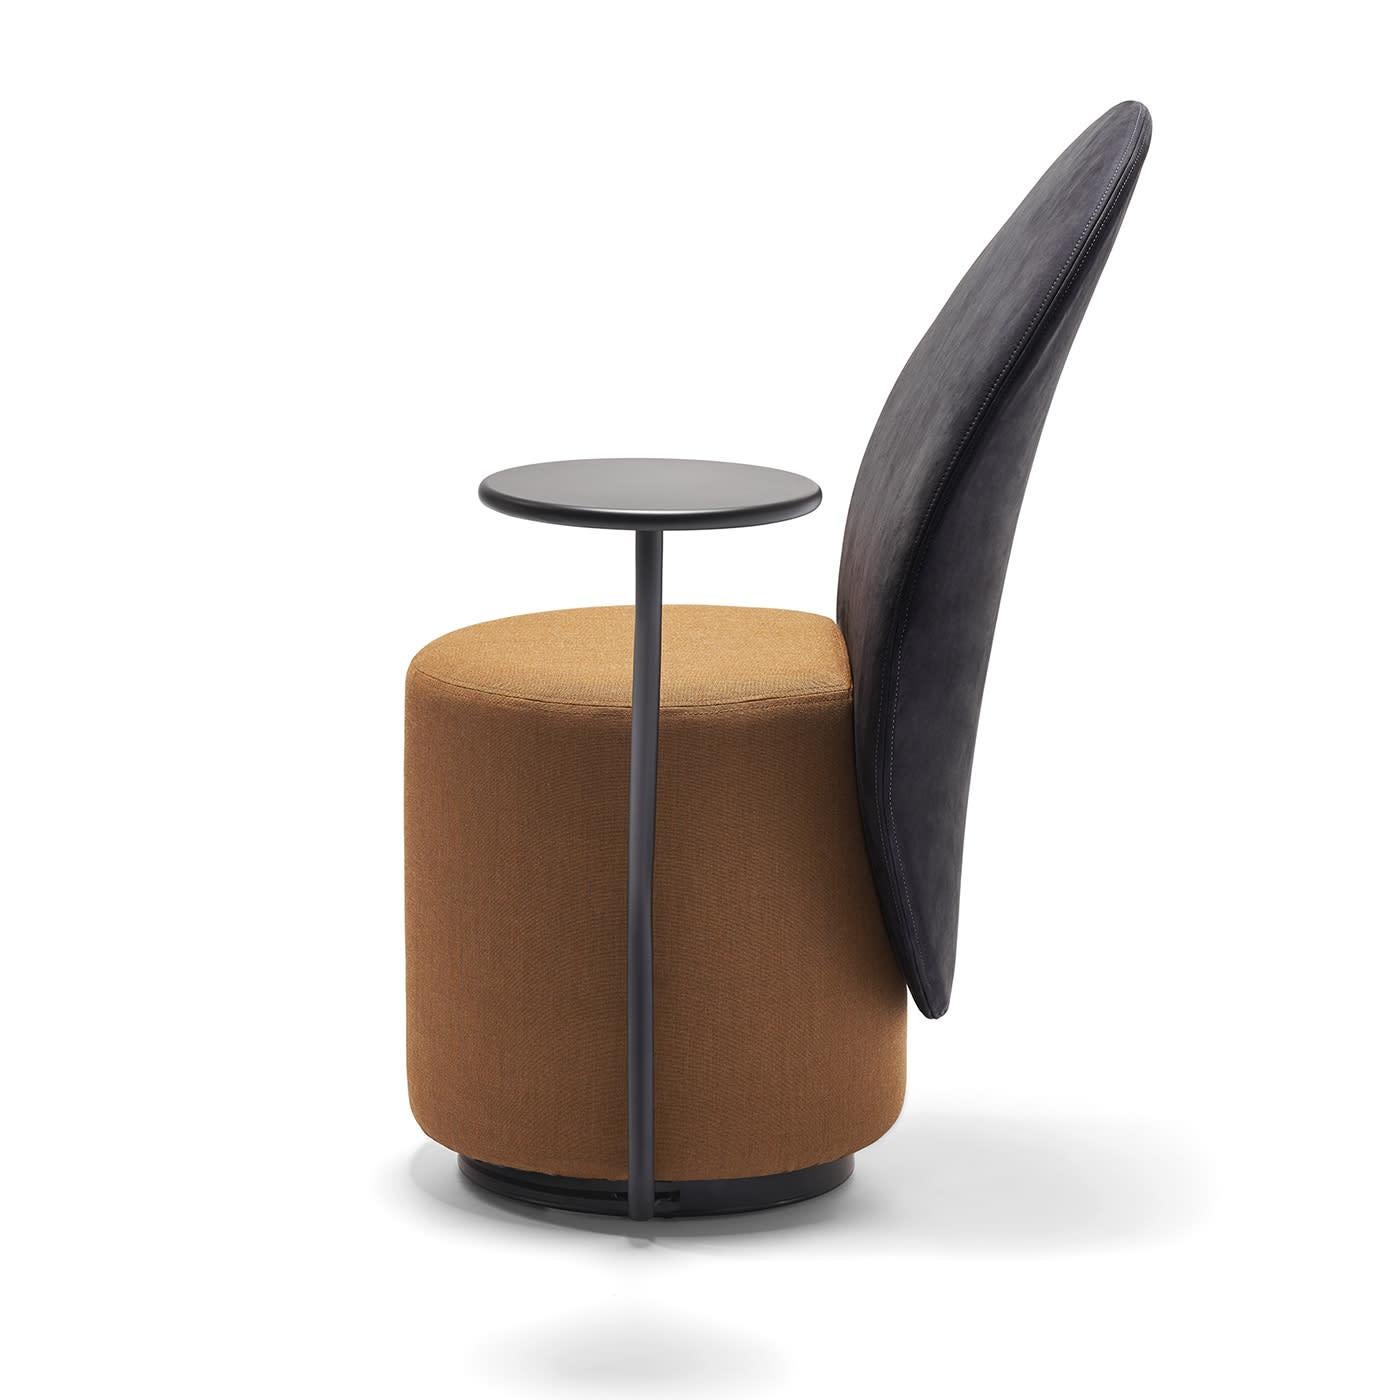 Comfort, multi-functionality, and pleasant aesthetic effortlessly merge in this stunning chair, designed by Lapo Ciatti to offer the plush experience of a padded armchair in a compact shape. A sculpted, cylindrical element - pivoting up to 180° -